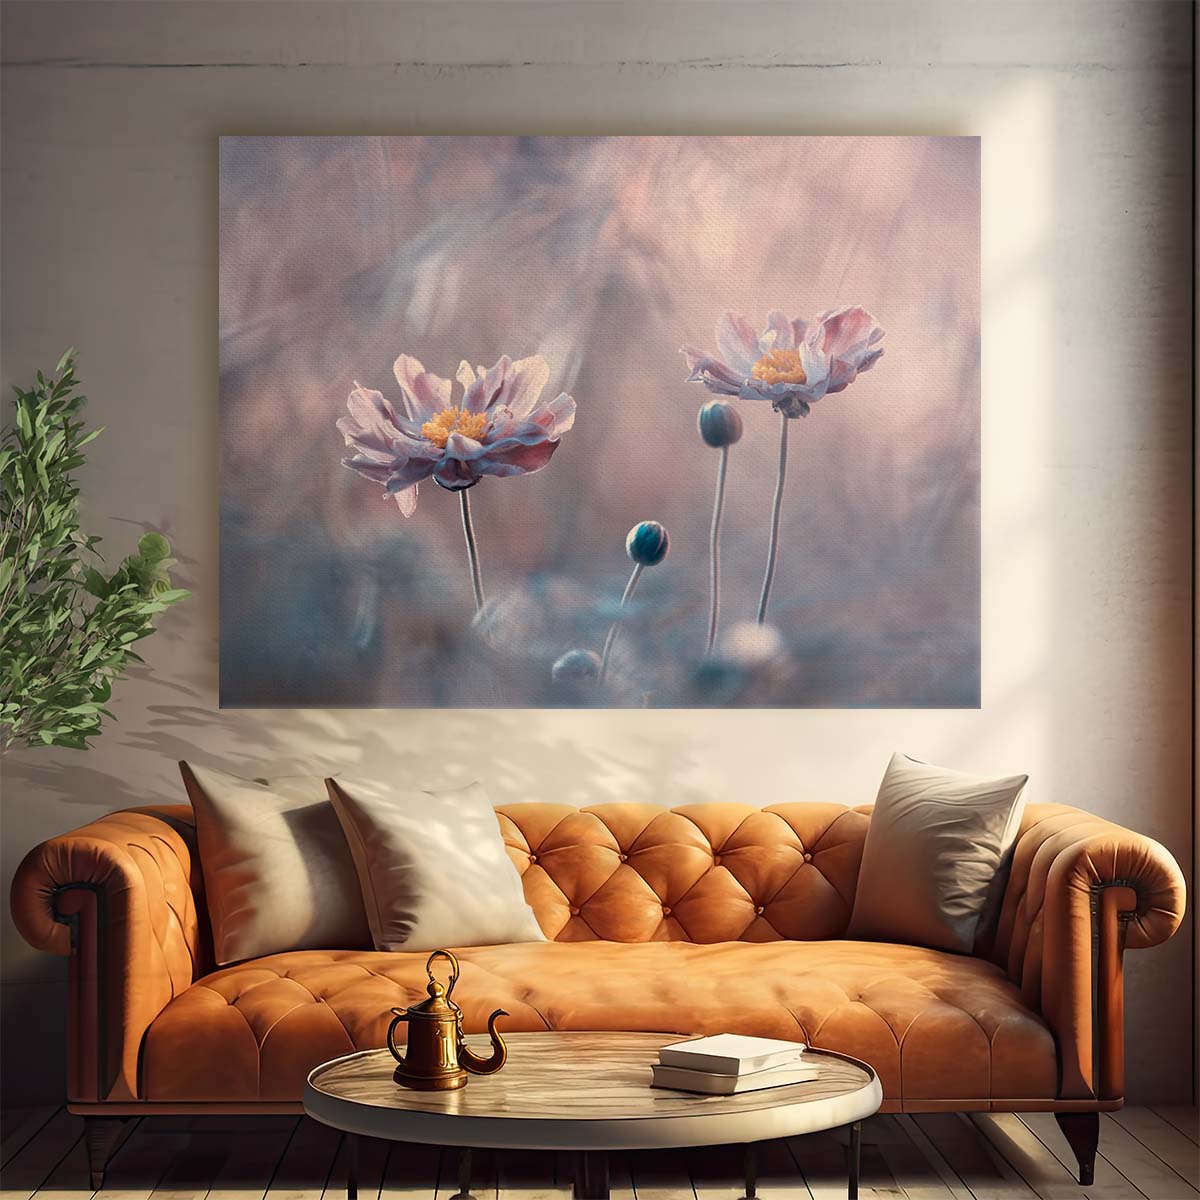 Pastel Pink Floral Duo Macro Garden Wall Art by Luxuriance Designs. Made in USA.